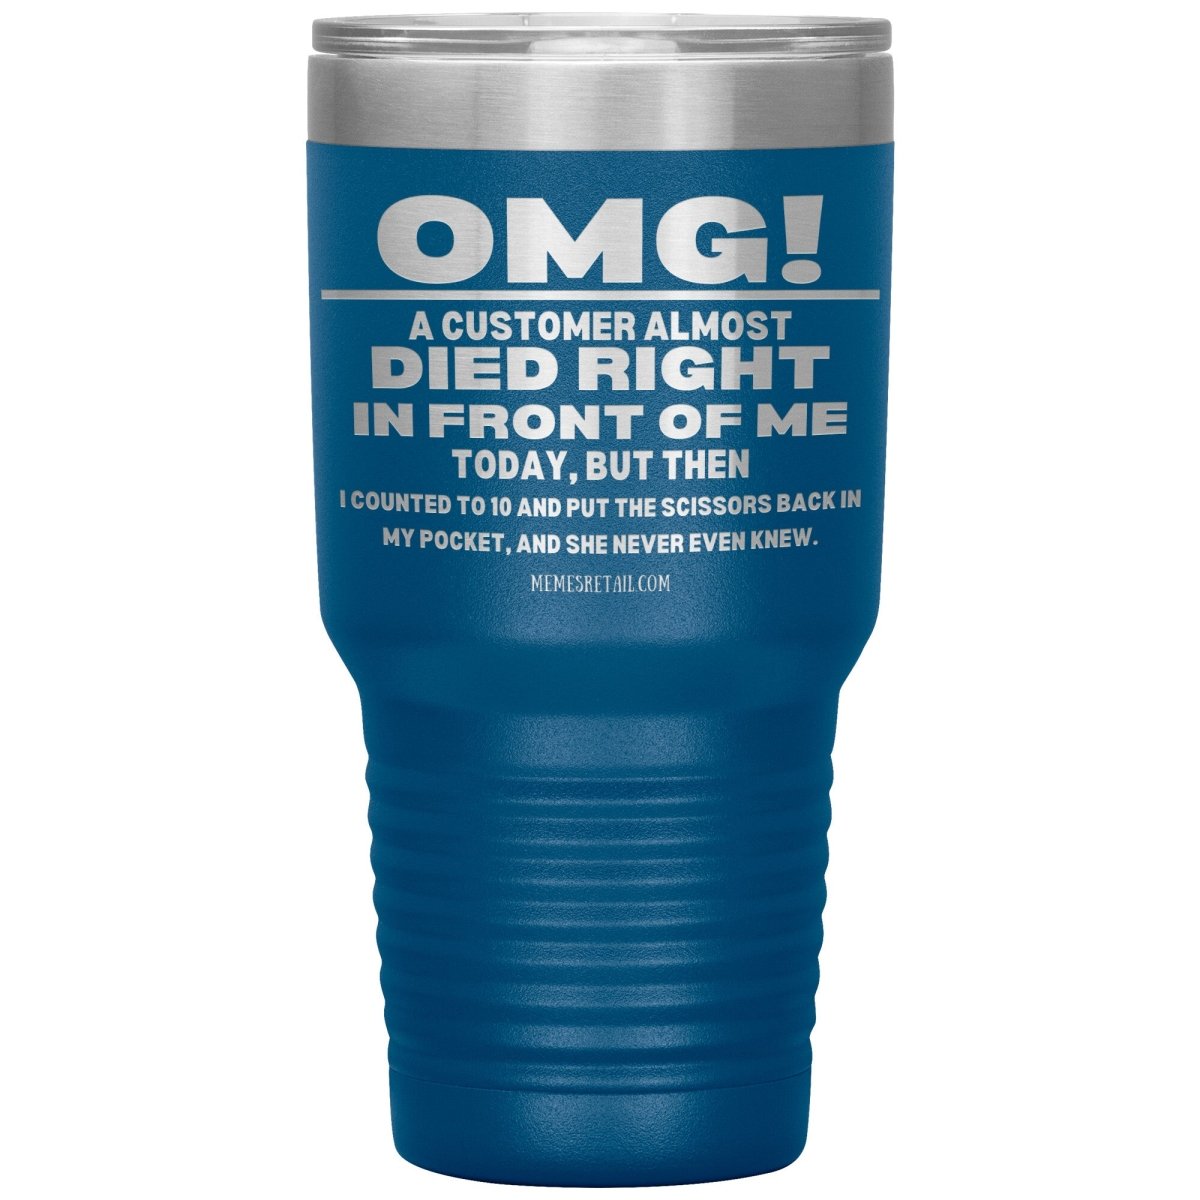 OMG! A Customer Almost Died Right In Front Of Me Tumbler, 30oz Insulated Tumbler / Blue - MemesRetail.com